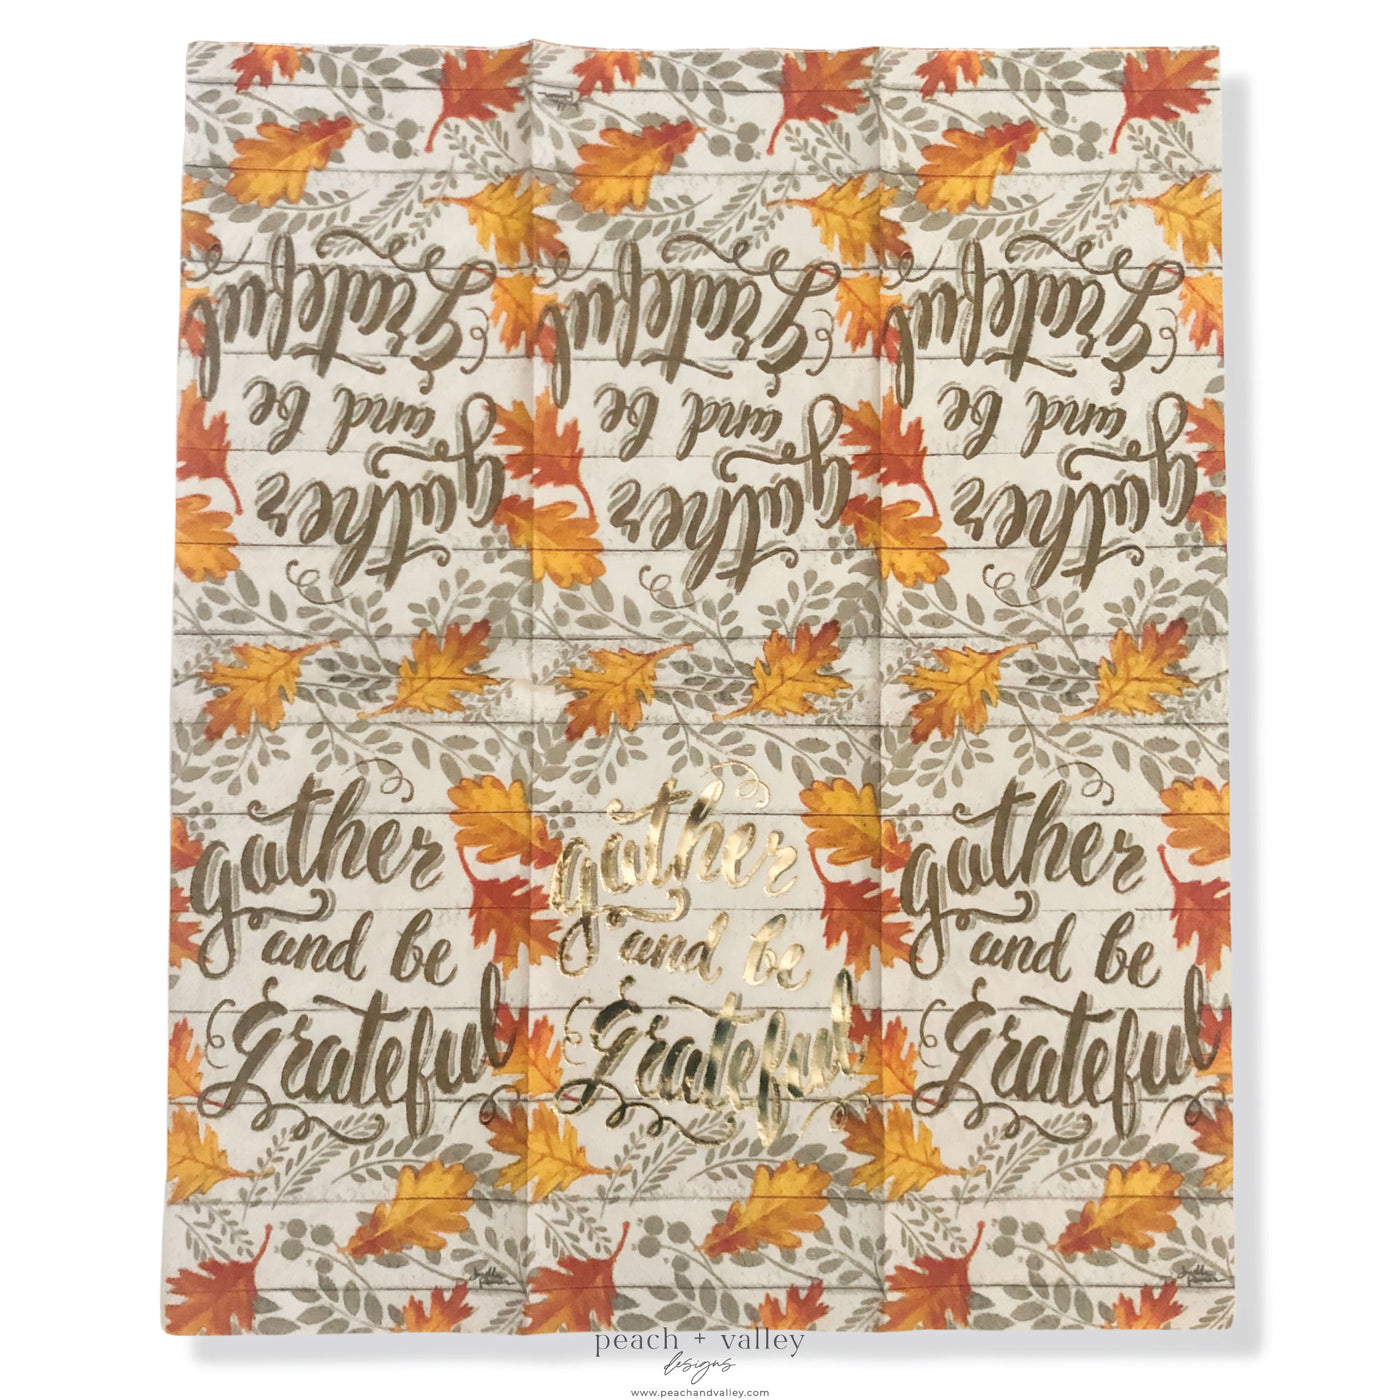 Gather and be Grateful Guest Napkin